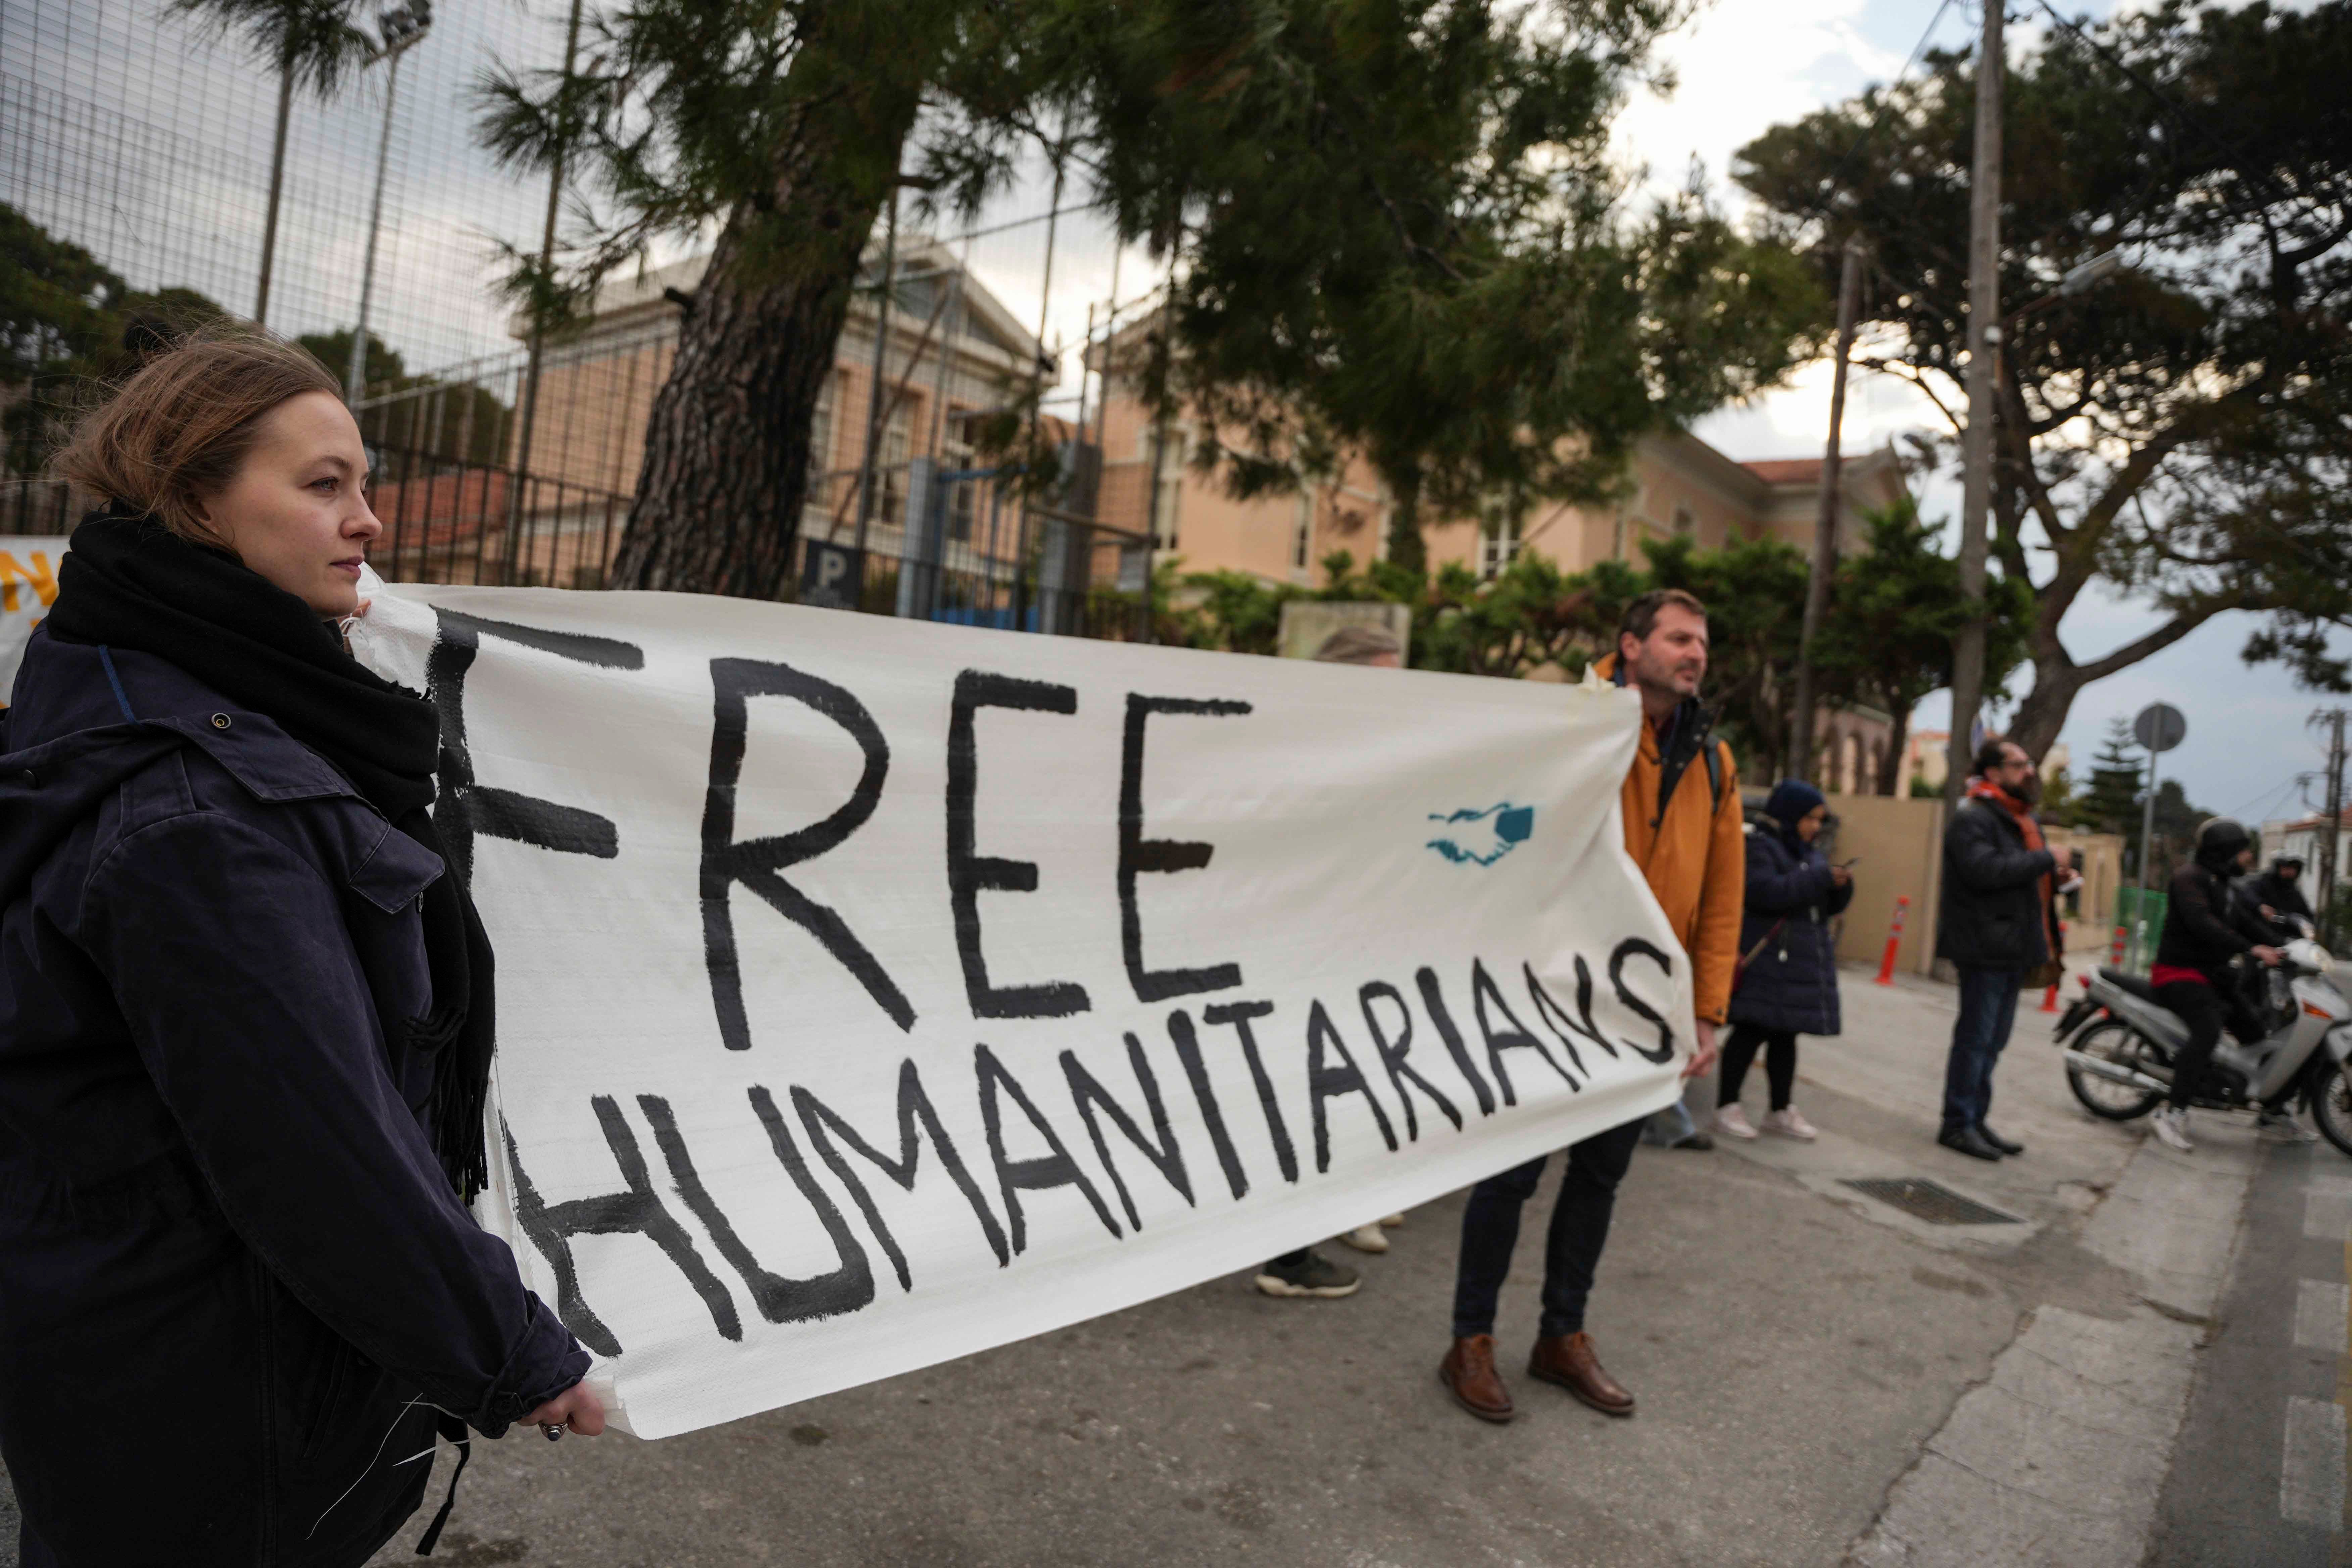 People hold a banner that reads "Free Humanitarians"